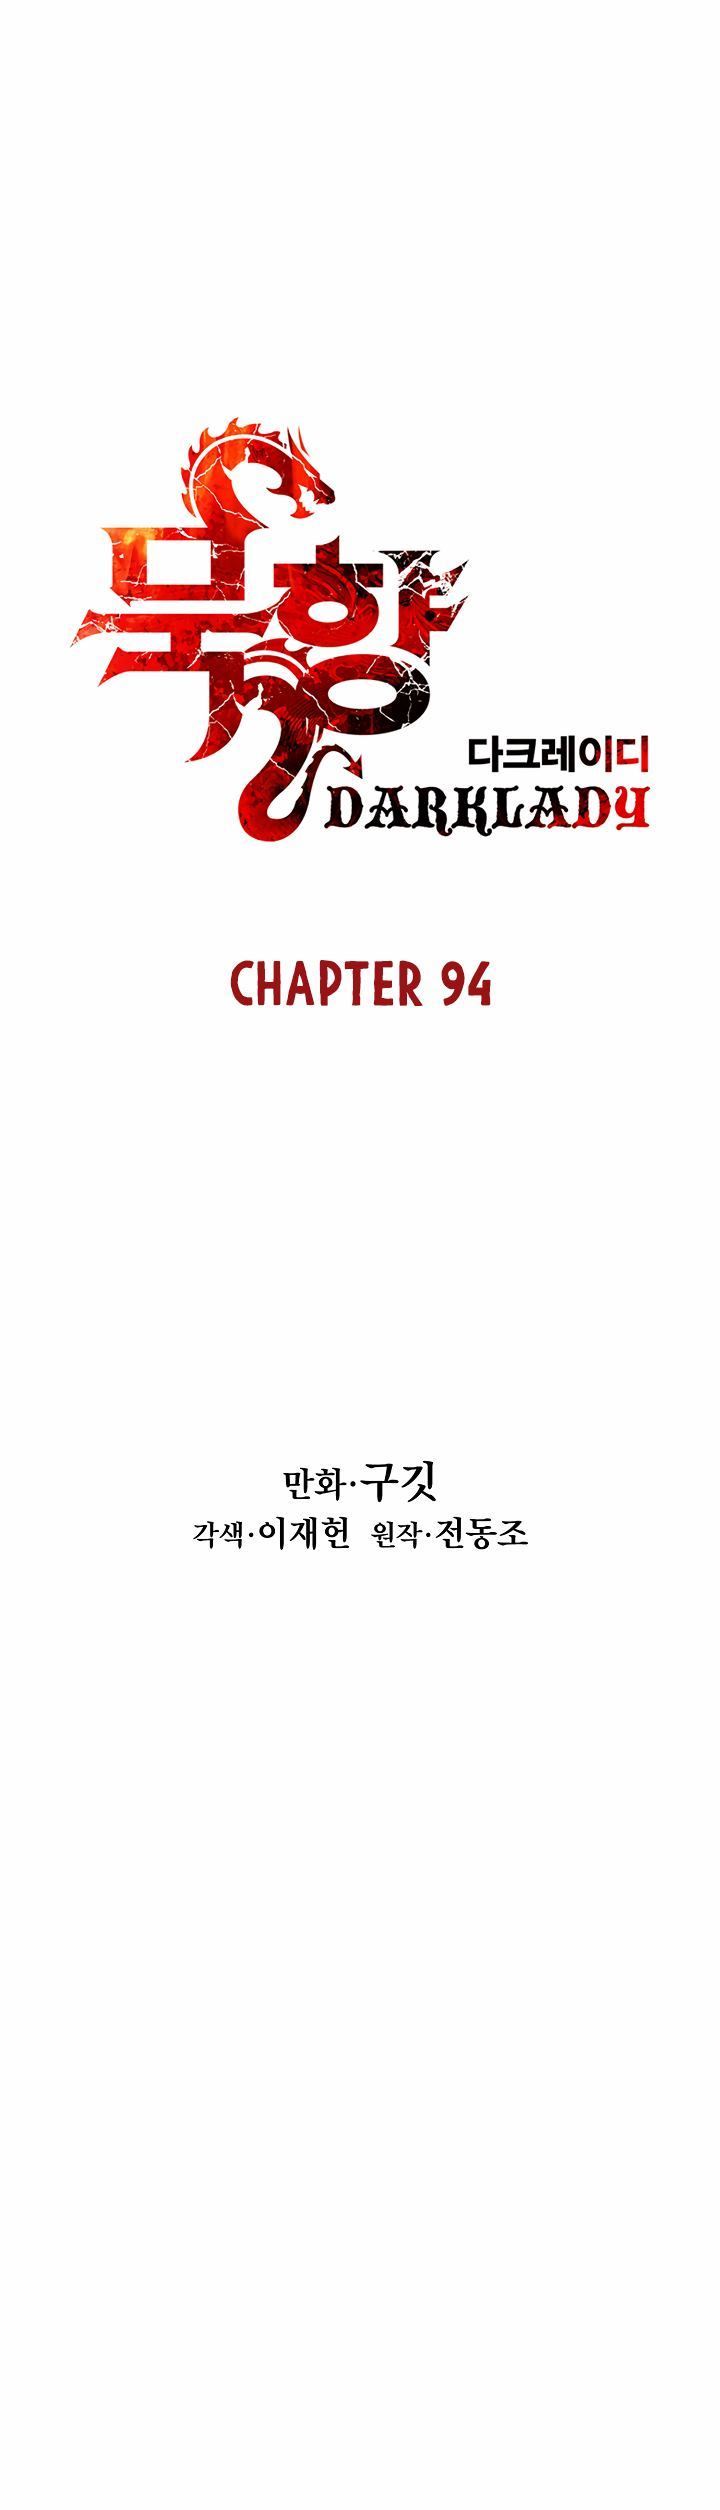 MookHyang – Dark Lady Chapter 94